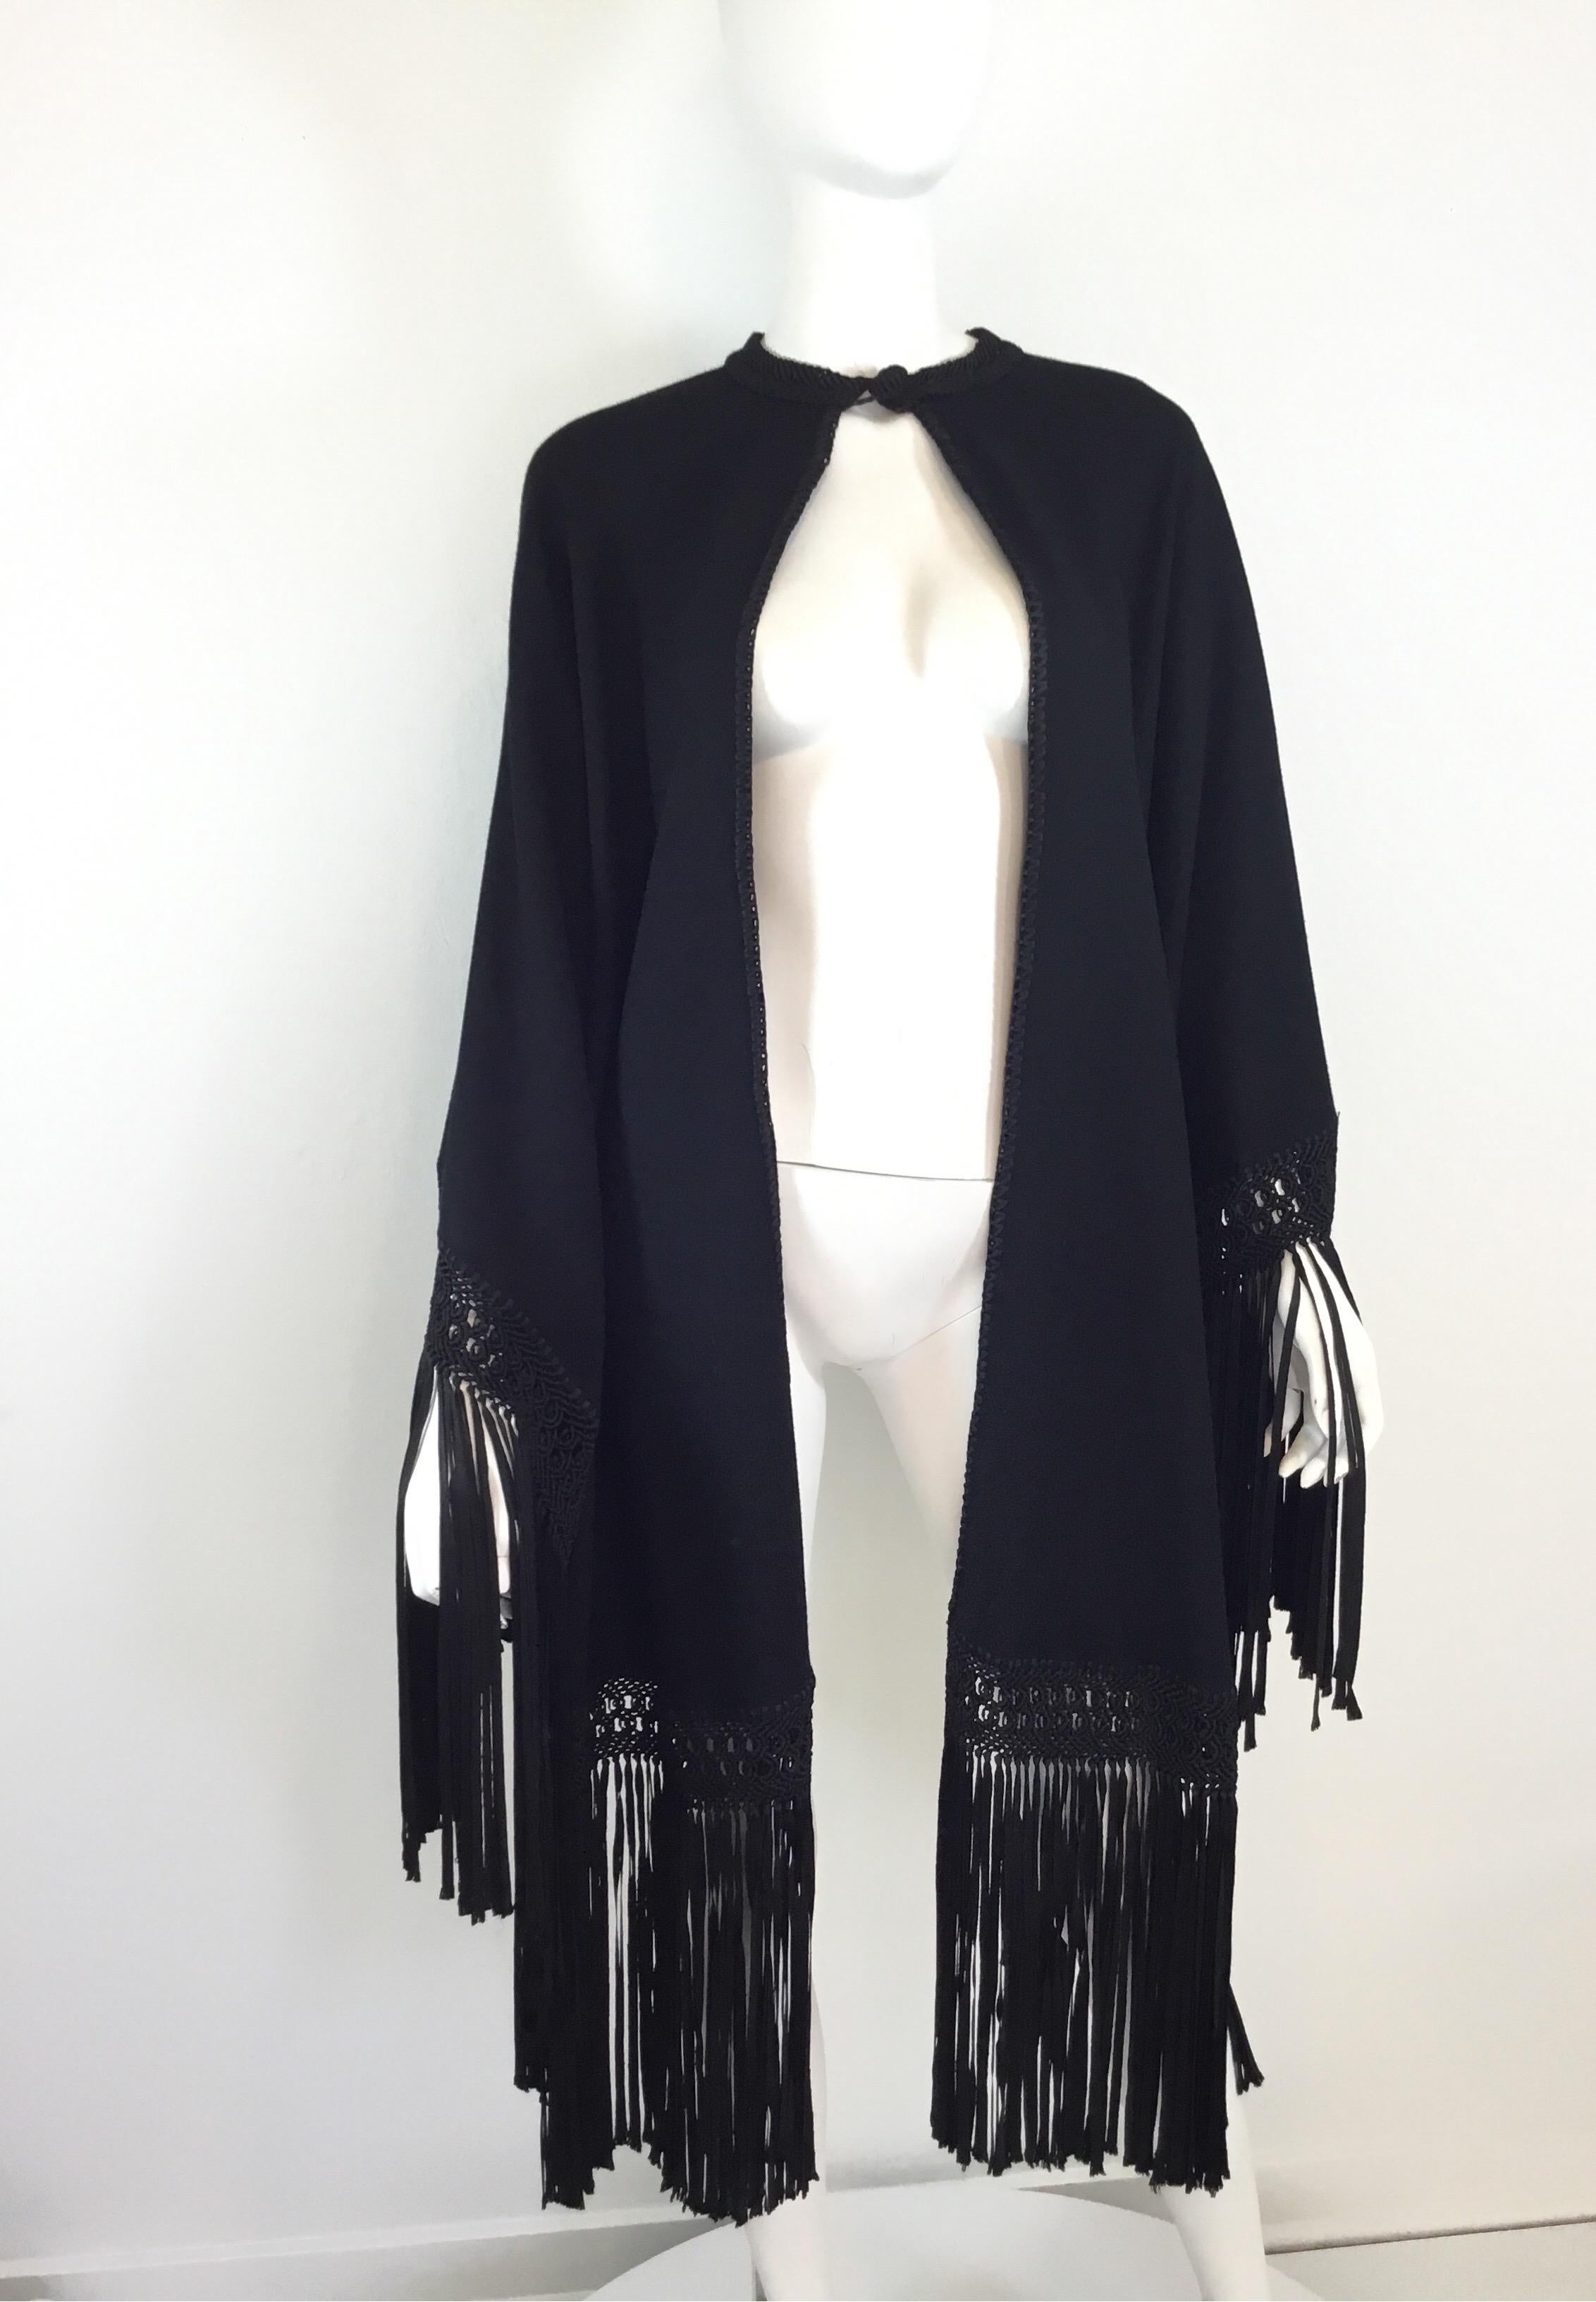 Vintage Wrap composed of wool and crepe with satin fringed detail. Wrap has a single button closure at the neck.

Length 23”